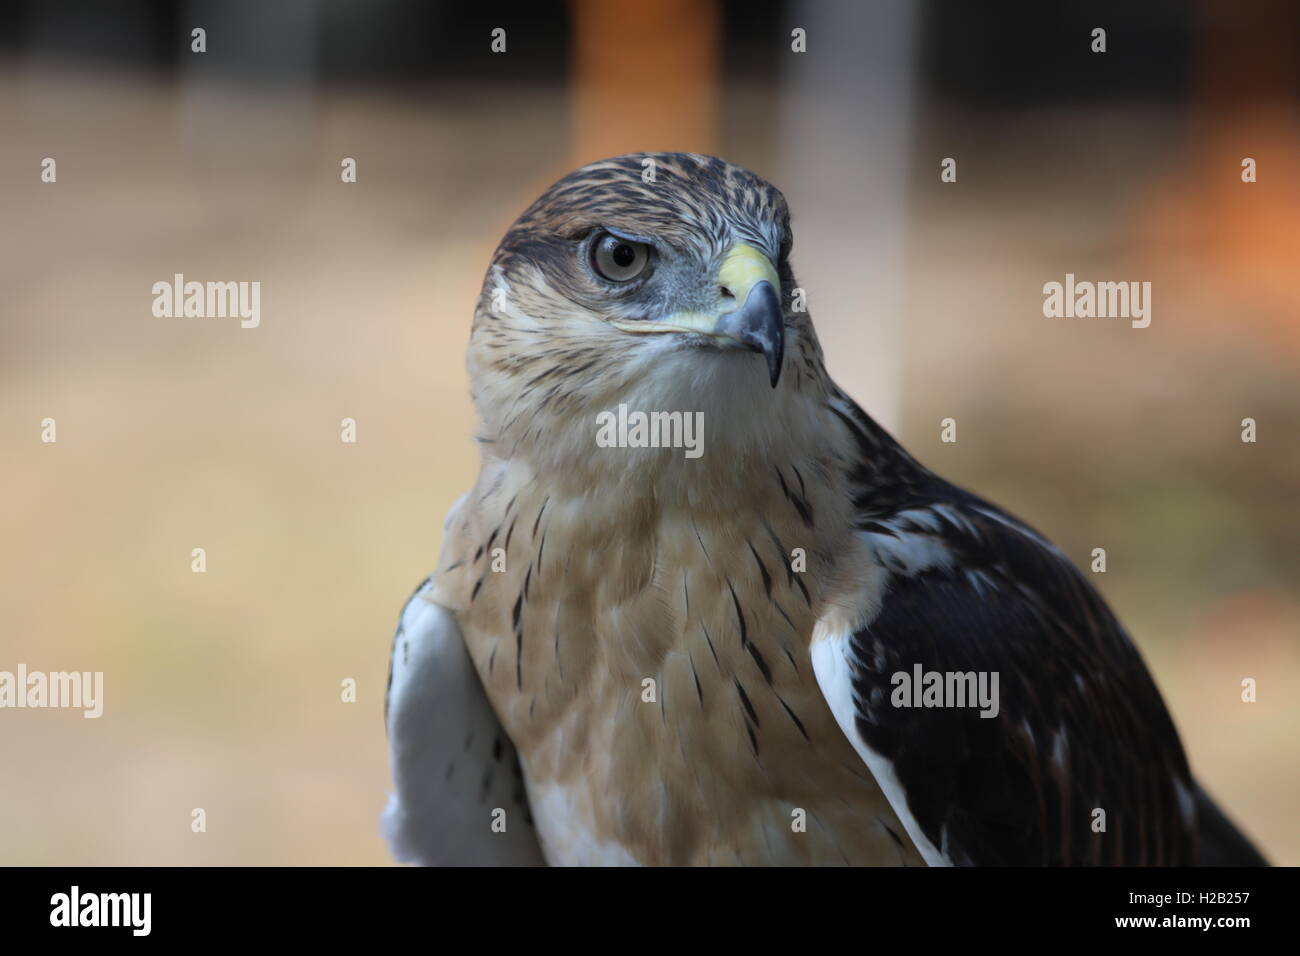 Hawk Red Tail Banque D'Images